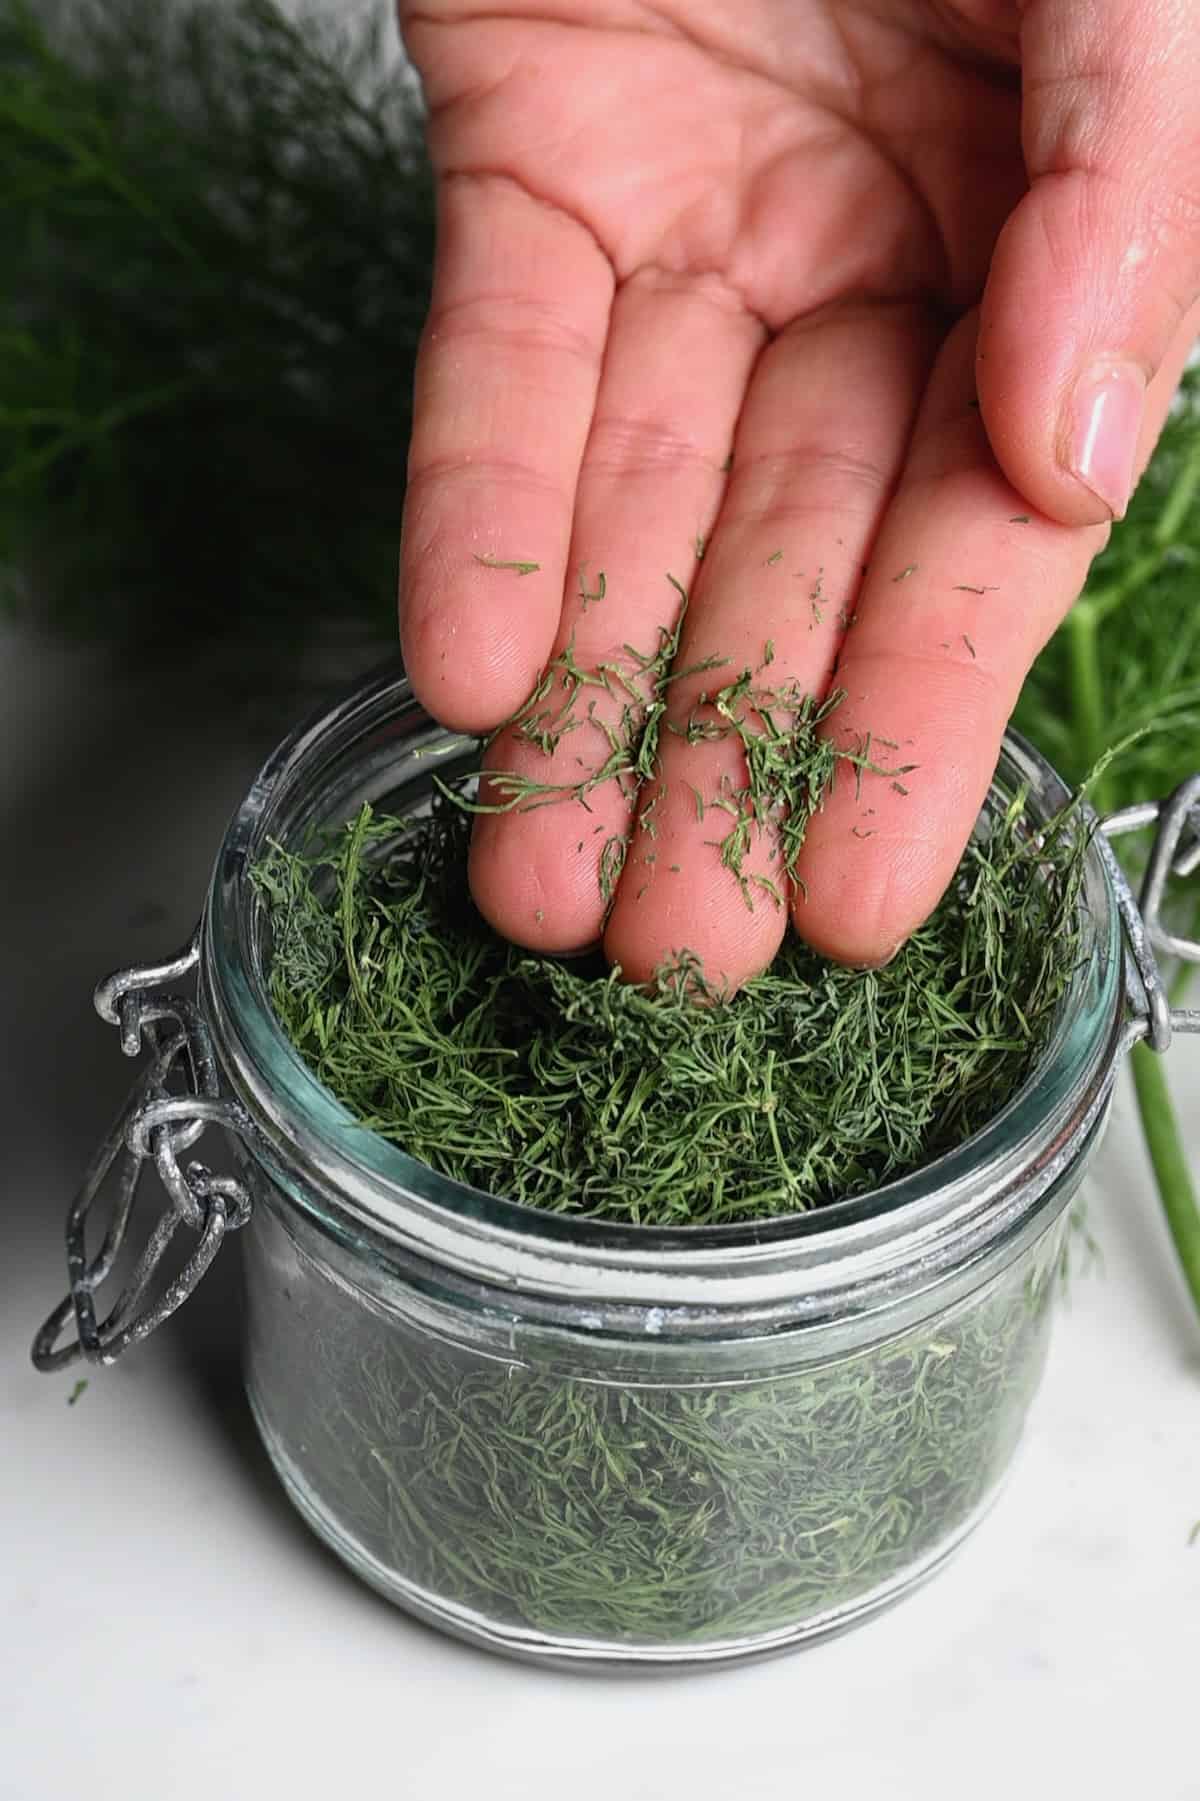 Dried dill in a hand